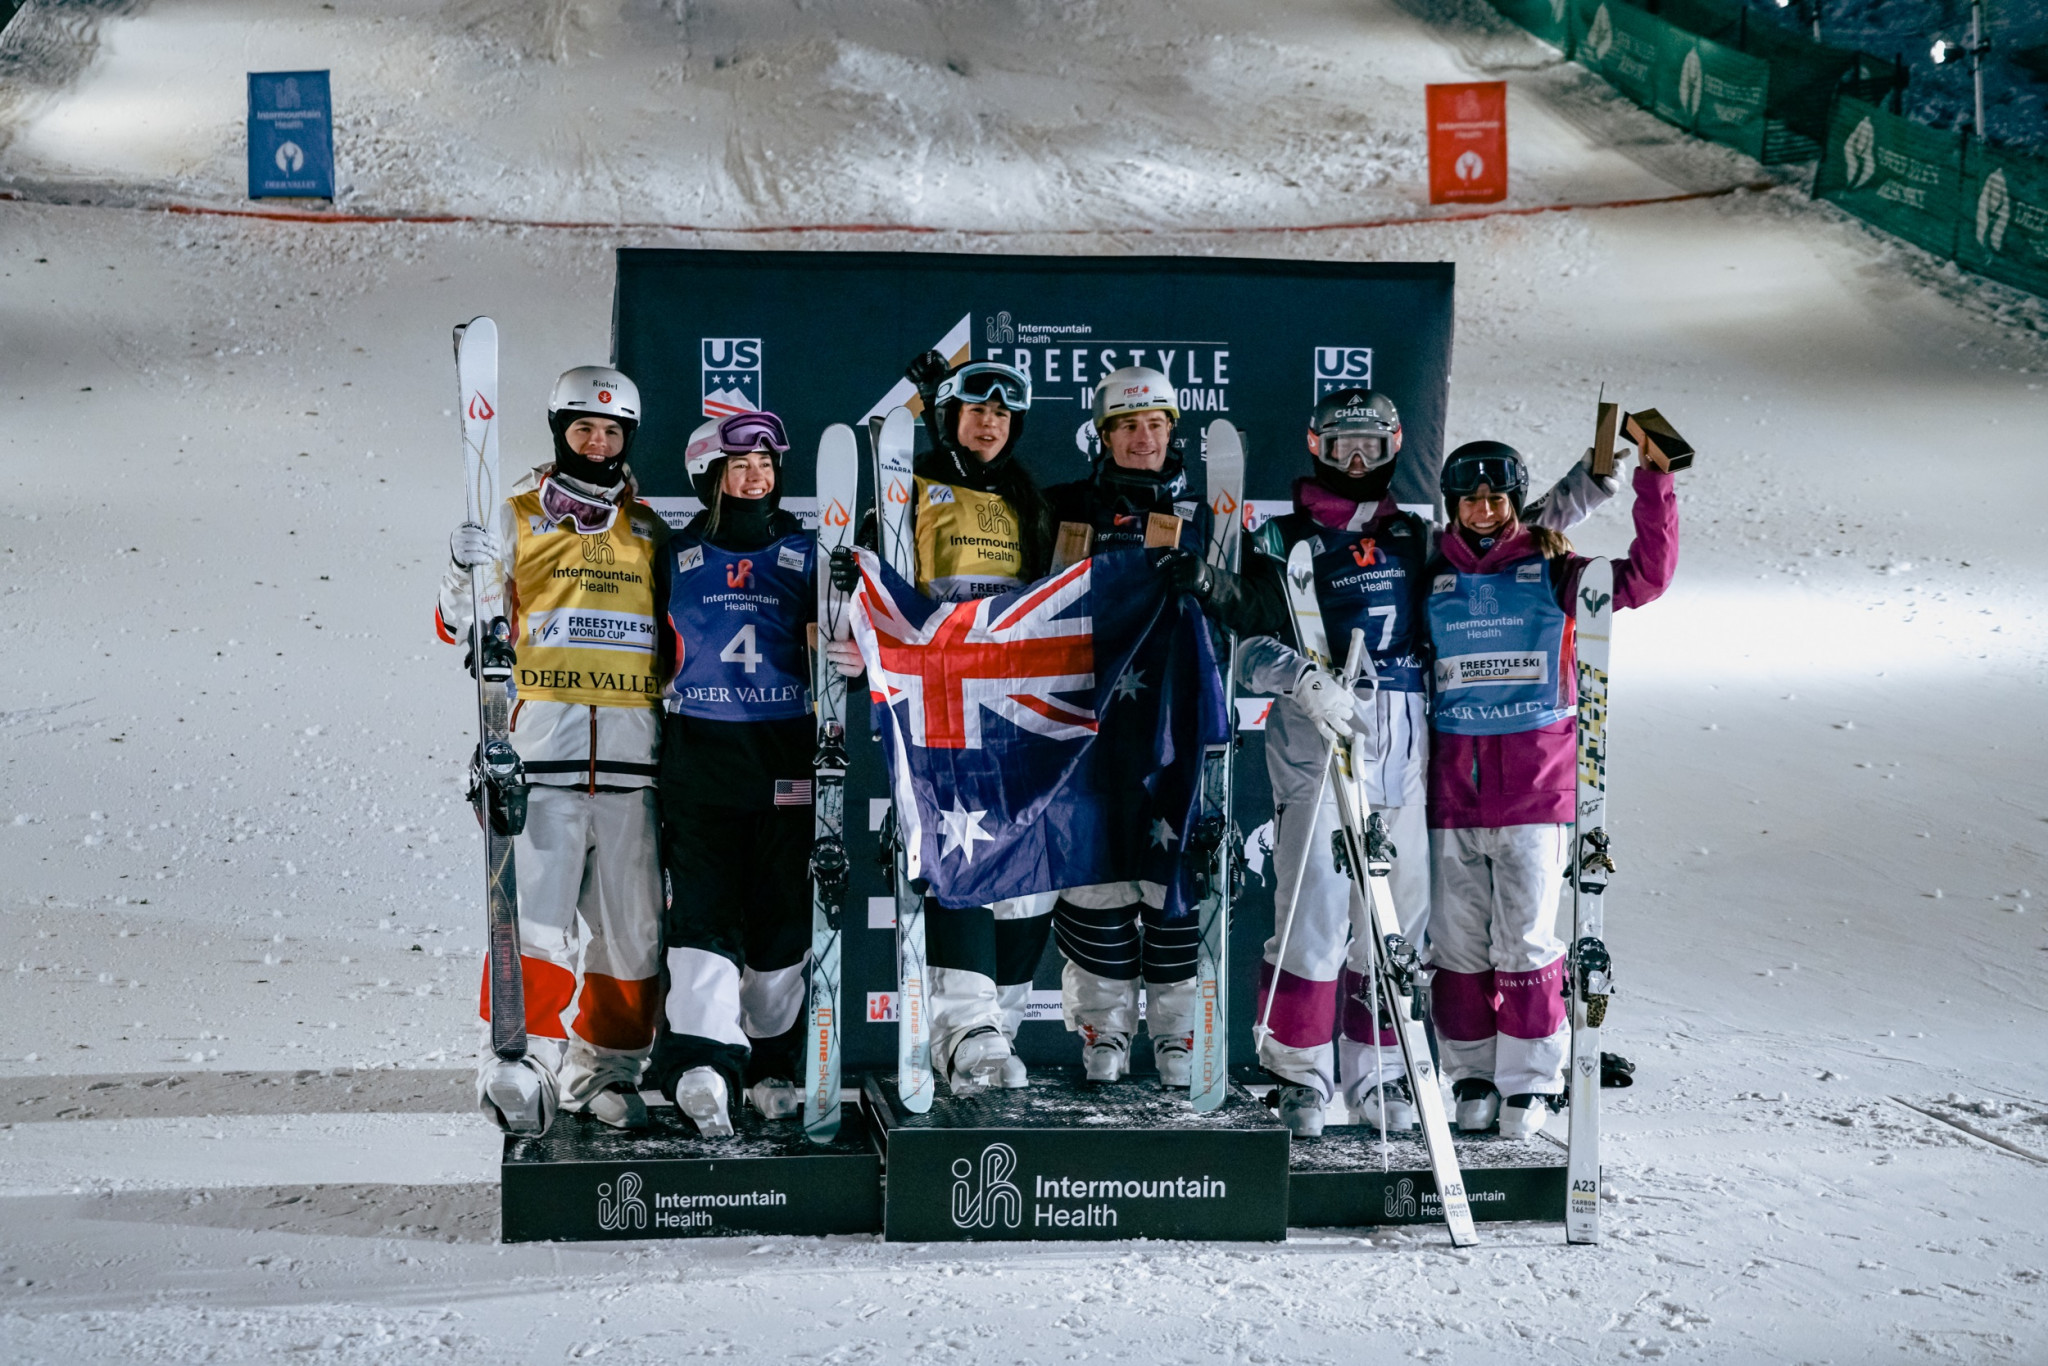 Australia enjoy moguls double at FIS Freestyle Ski World Cup in Deer Valley